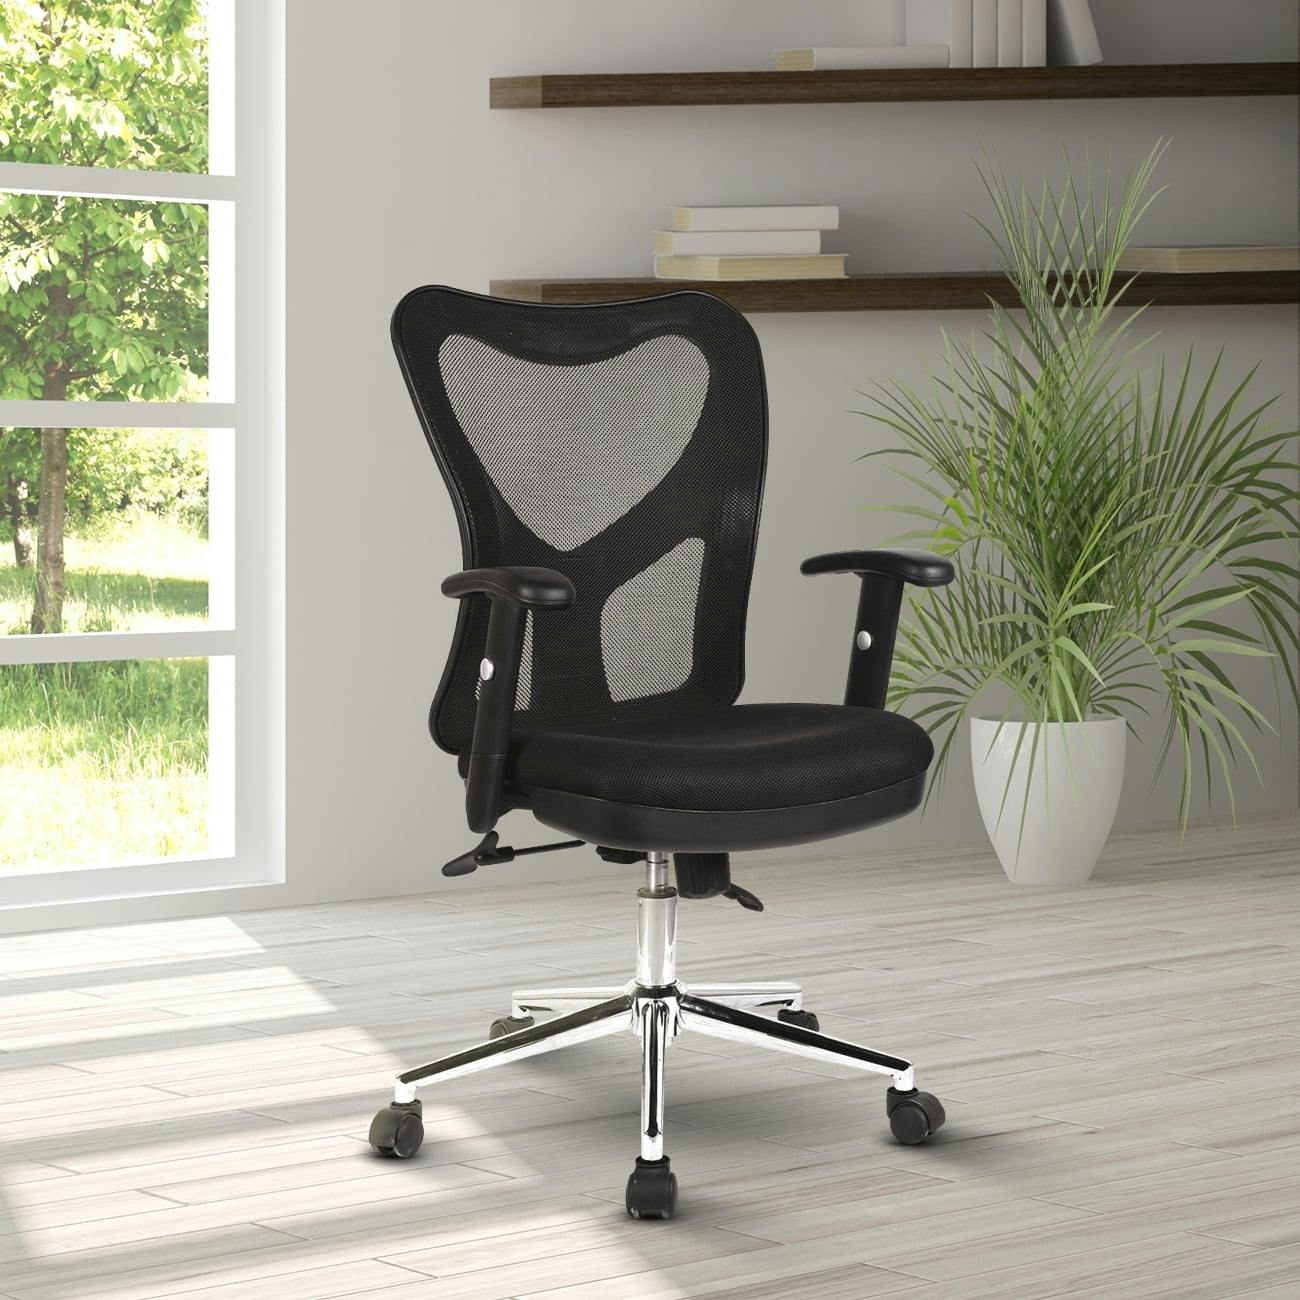 Sleek Contemporary High-Back Black Mesh Office Chair with Chrome Base